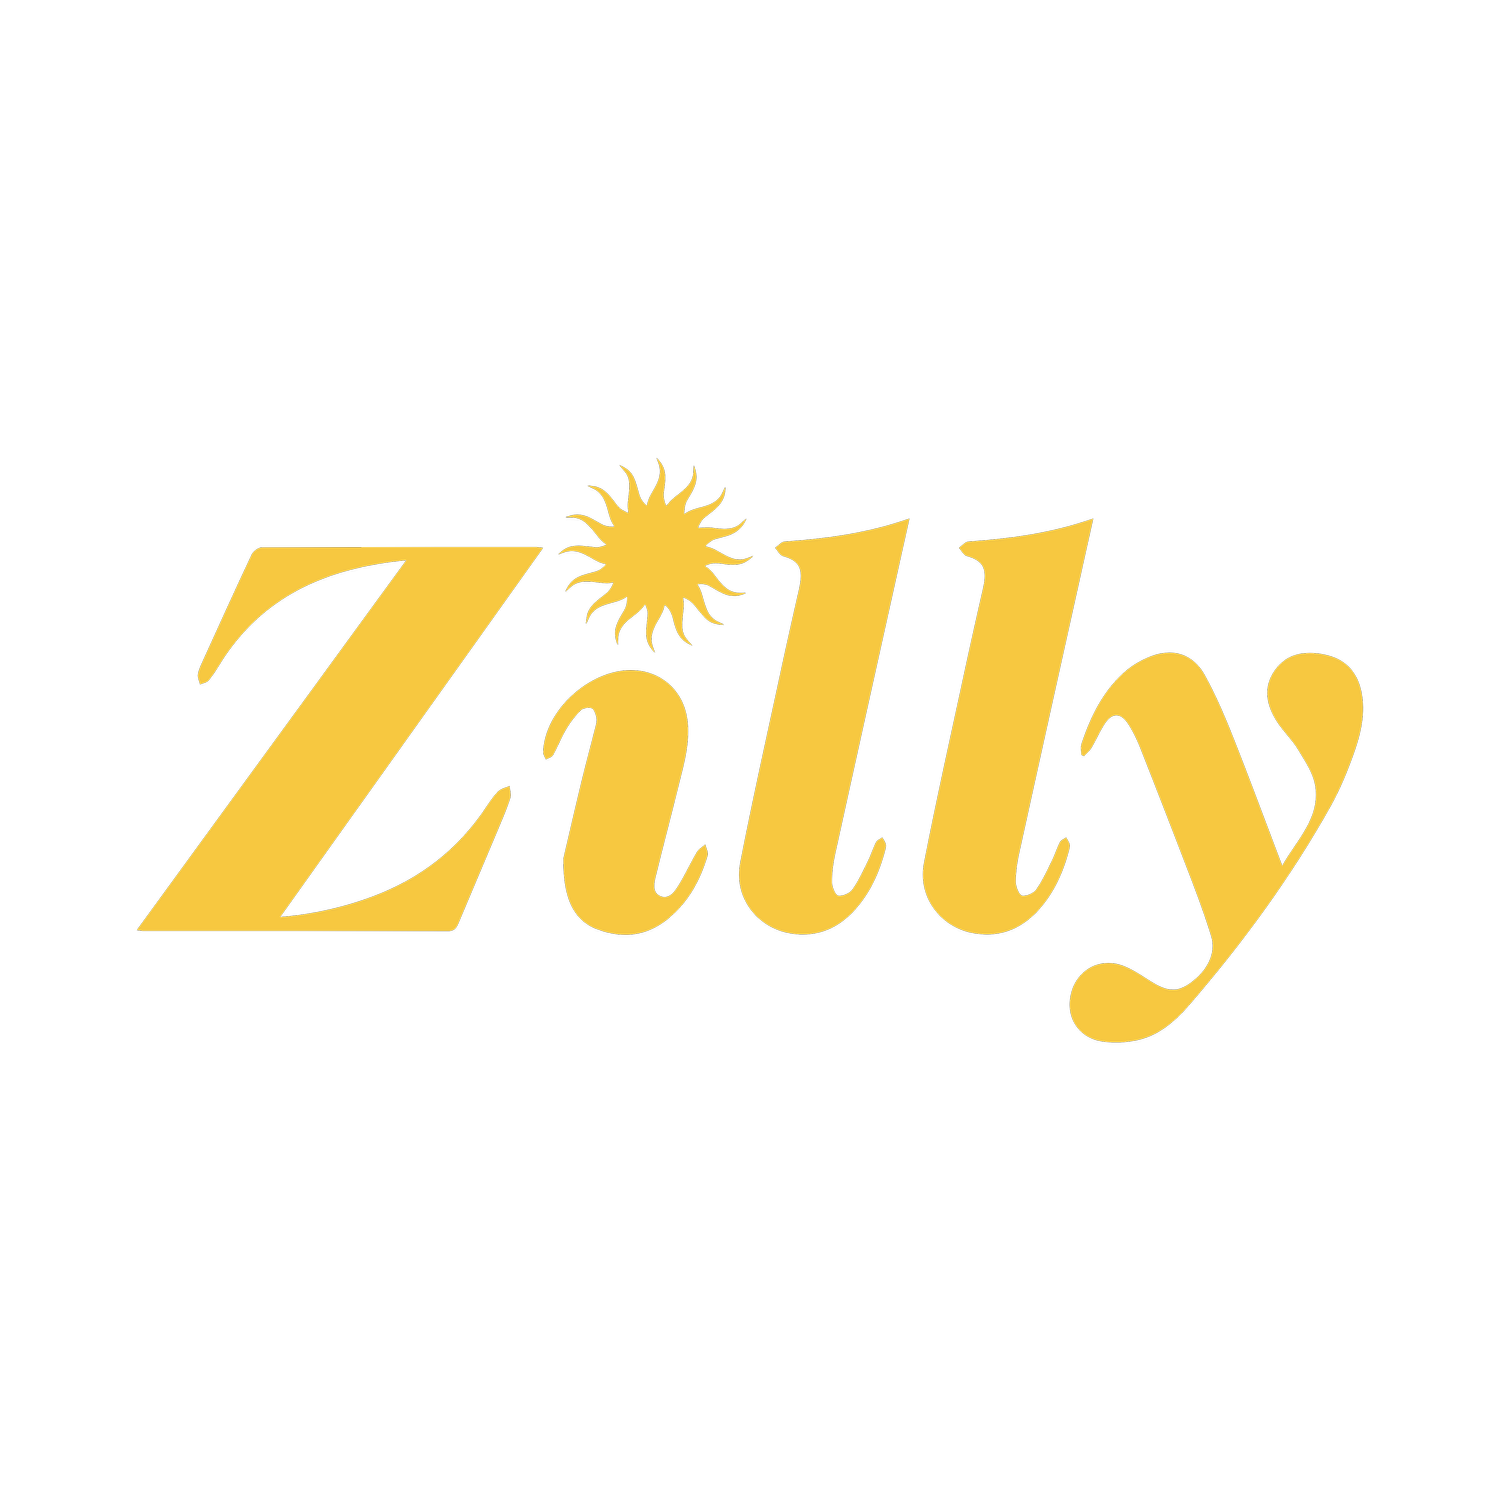 ZILLY